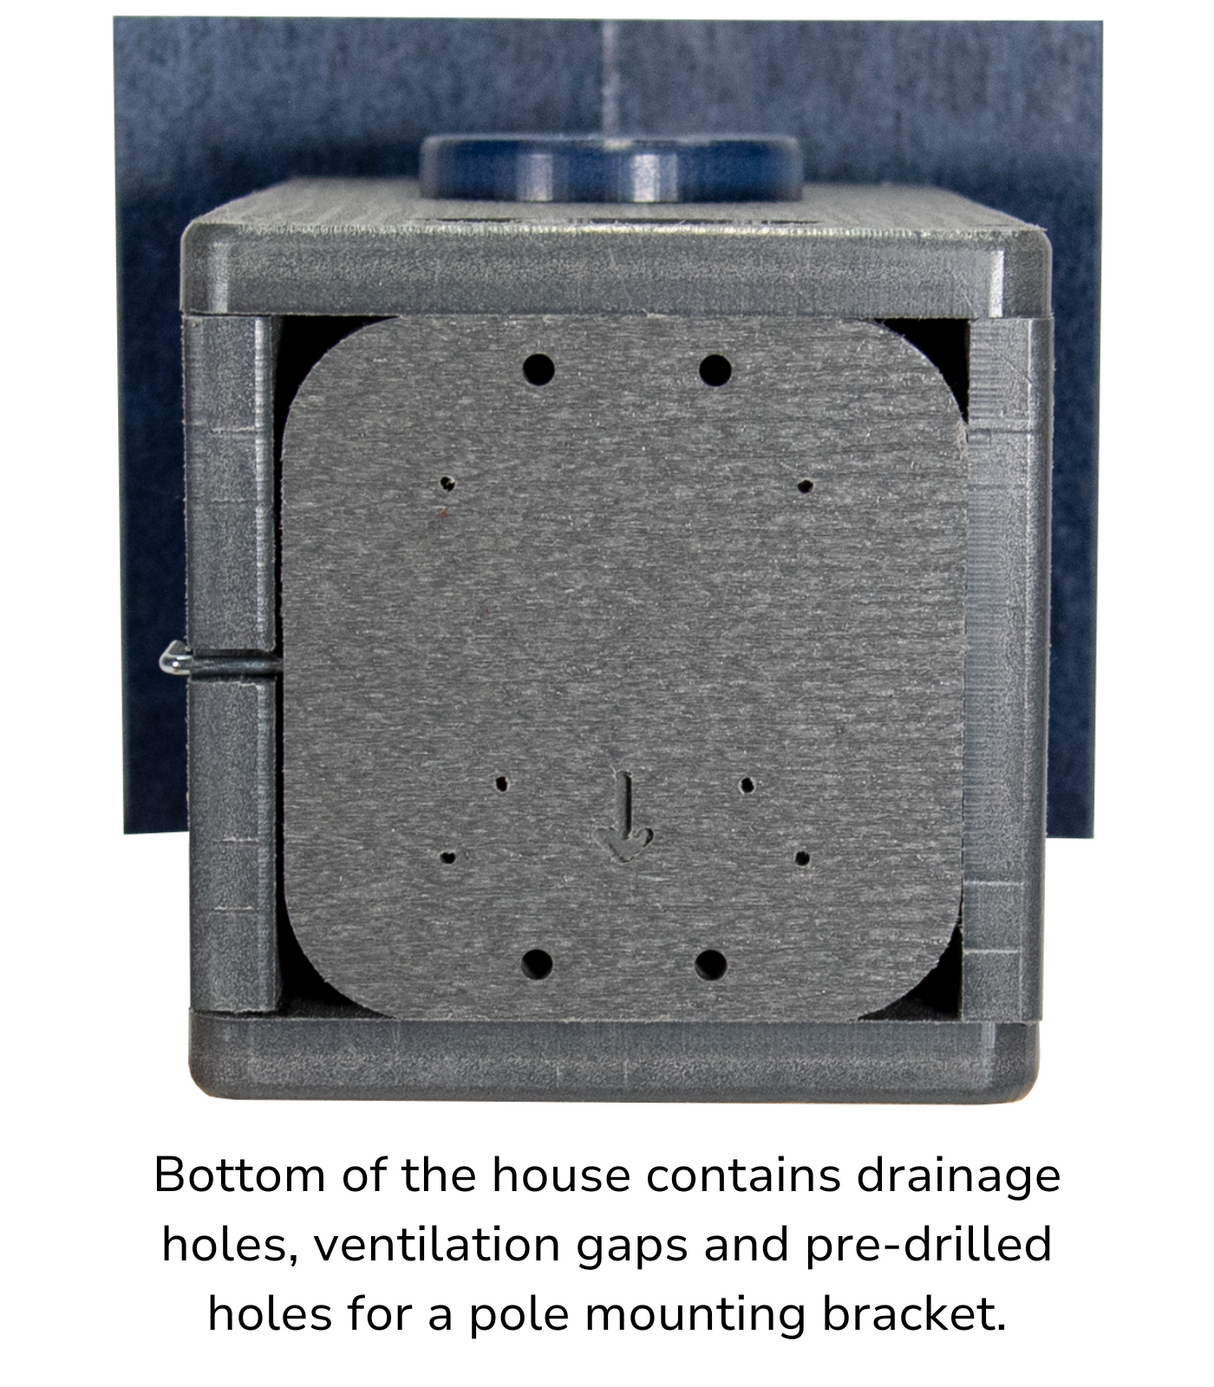 This photo shows the bottom of the bluebird house with text that reads, "Bottom of the house contains drainage holes, ventilation gaps and pre-drilled holes for a pole mounting bracket"